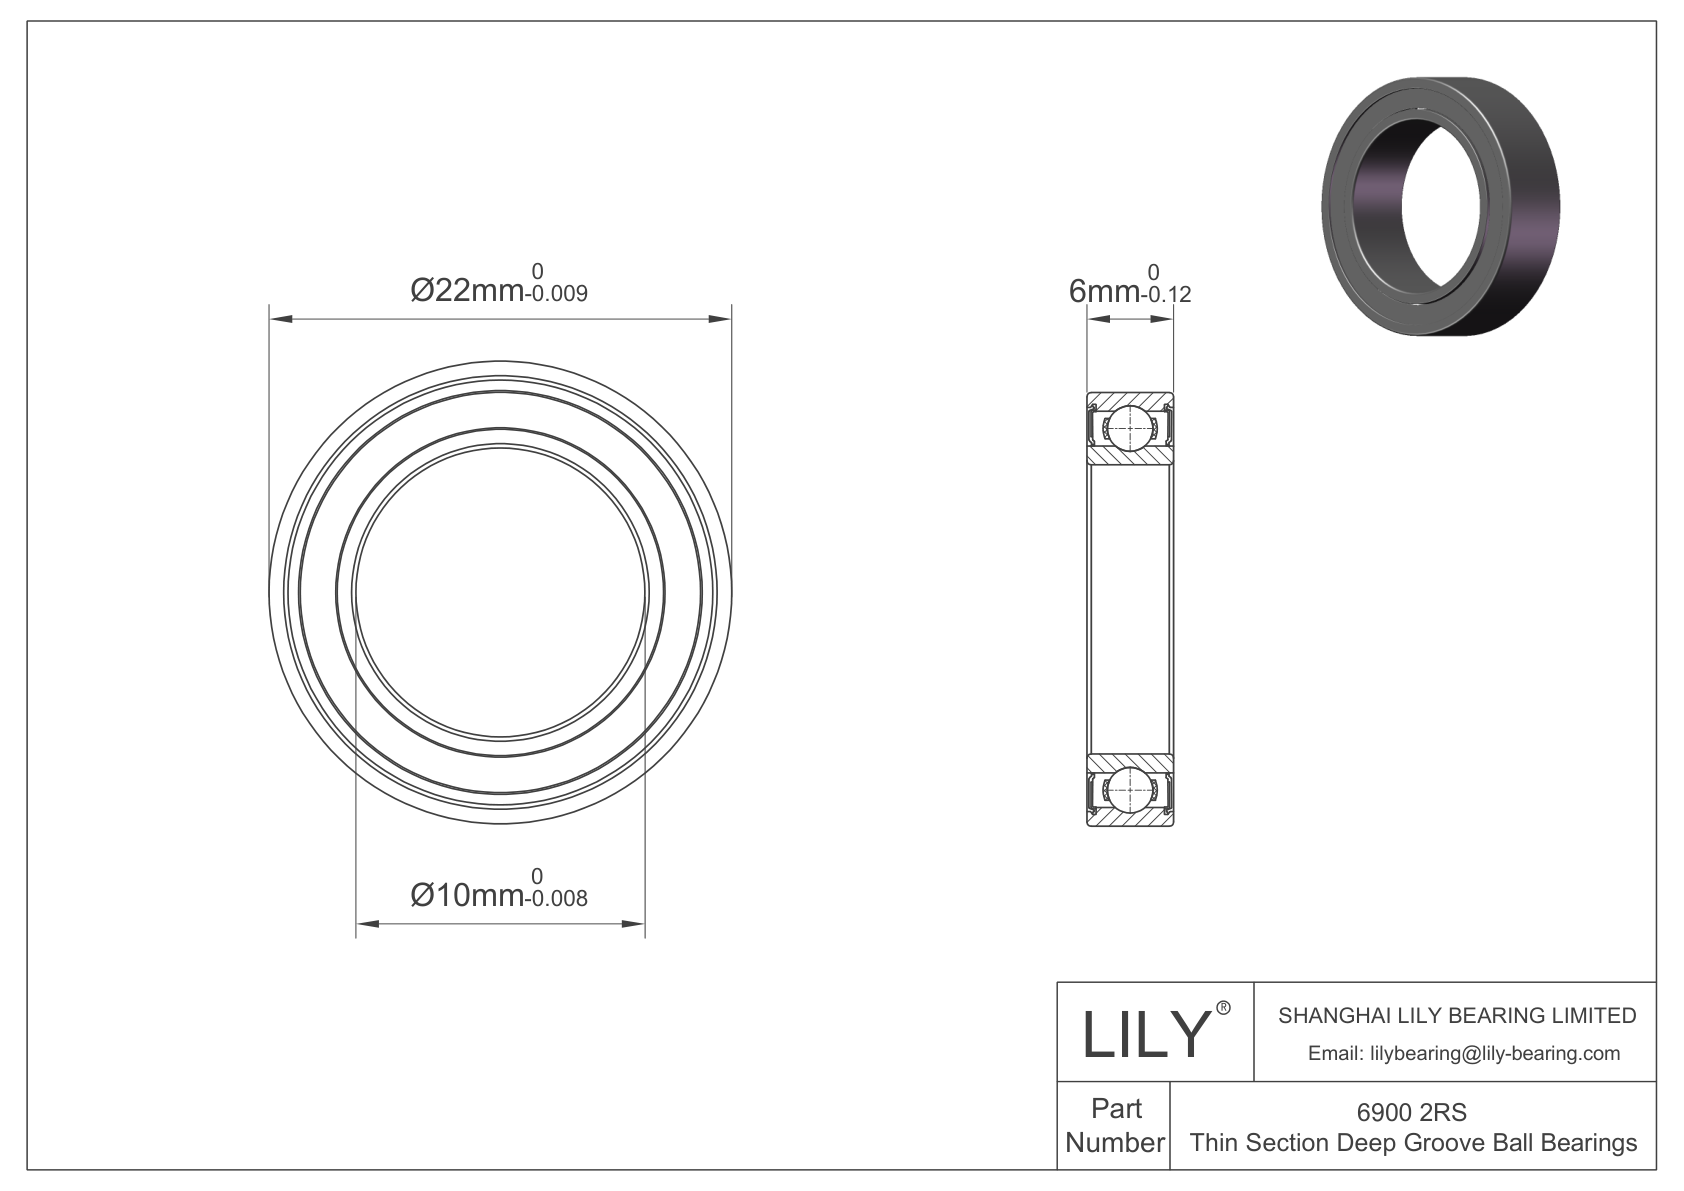 LILY-BS690025.4-7 POM Coated Bearing cad drawing